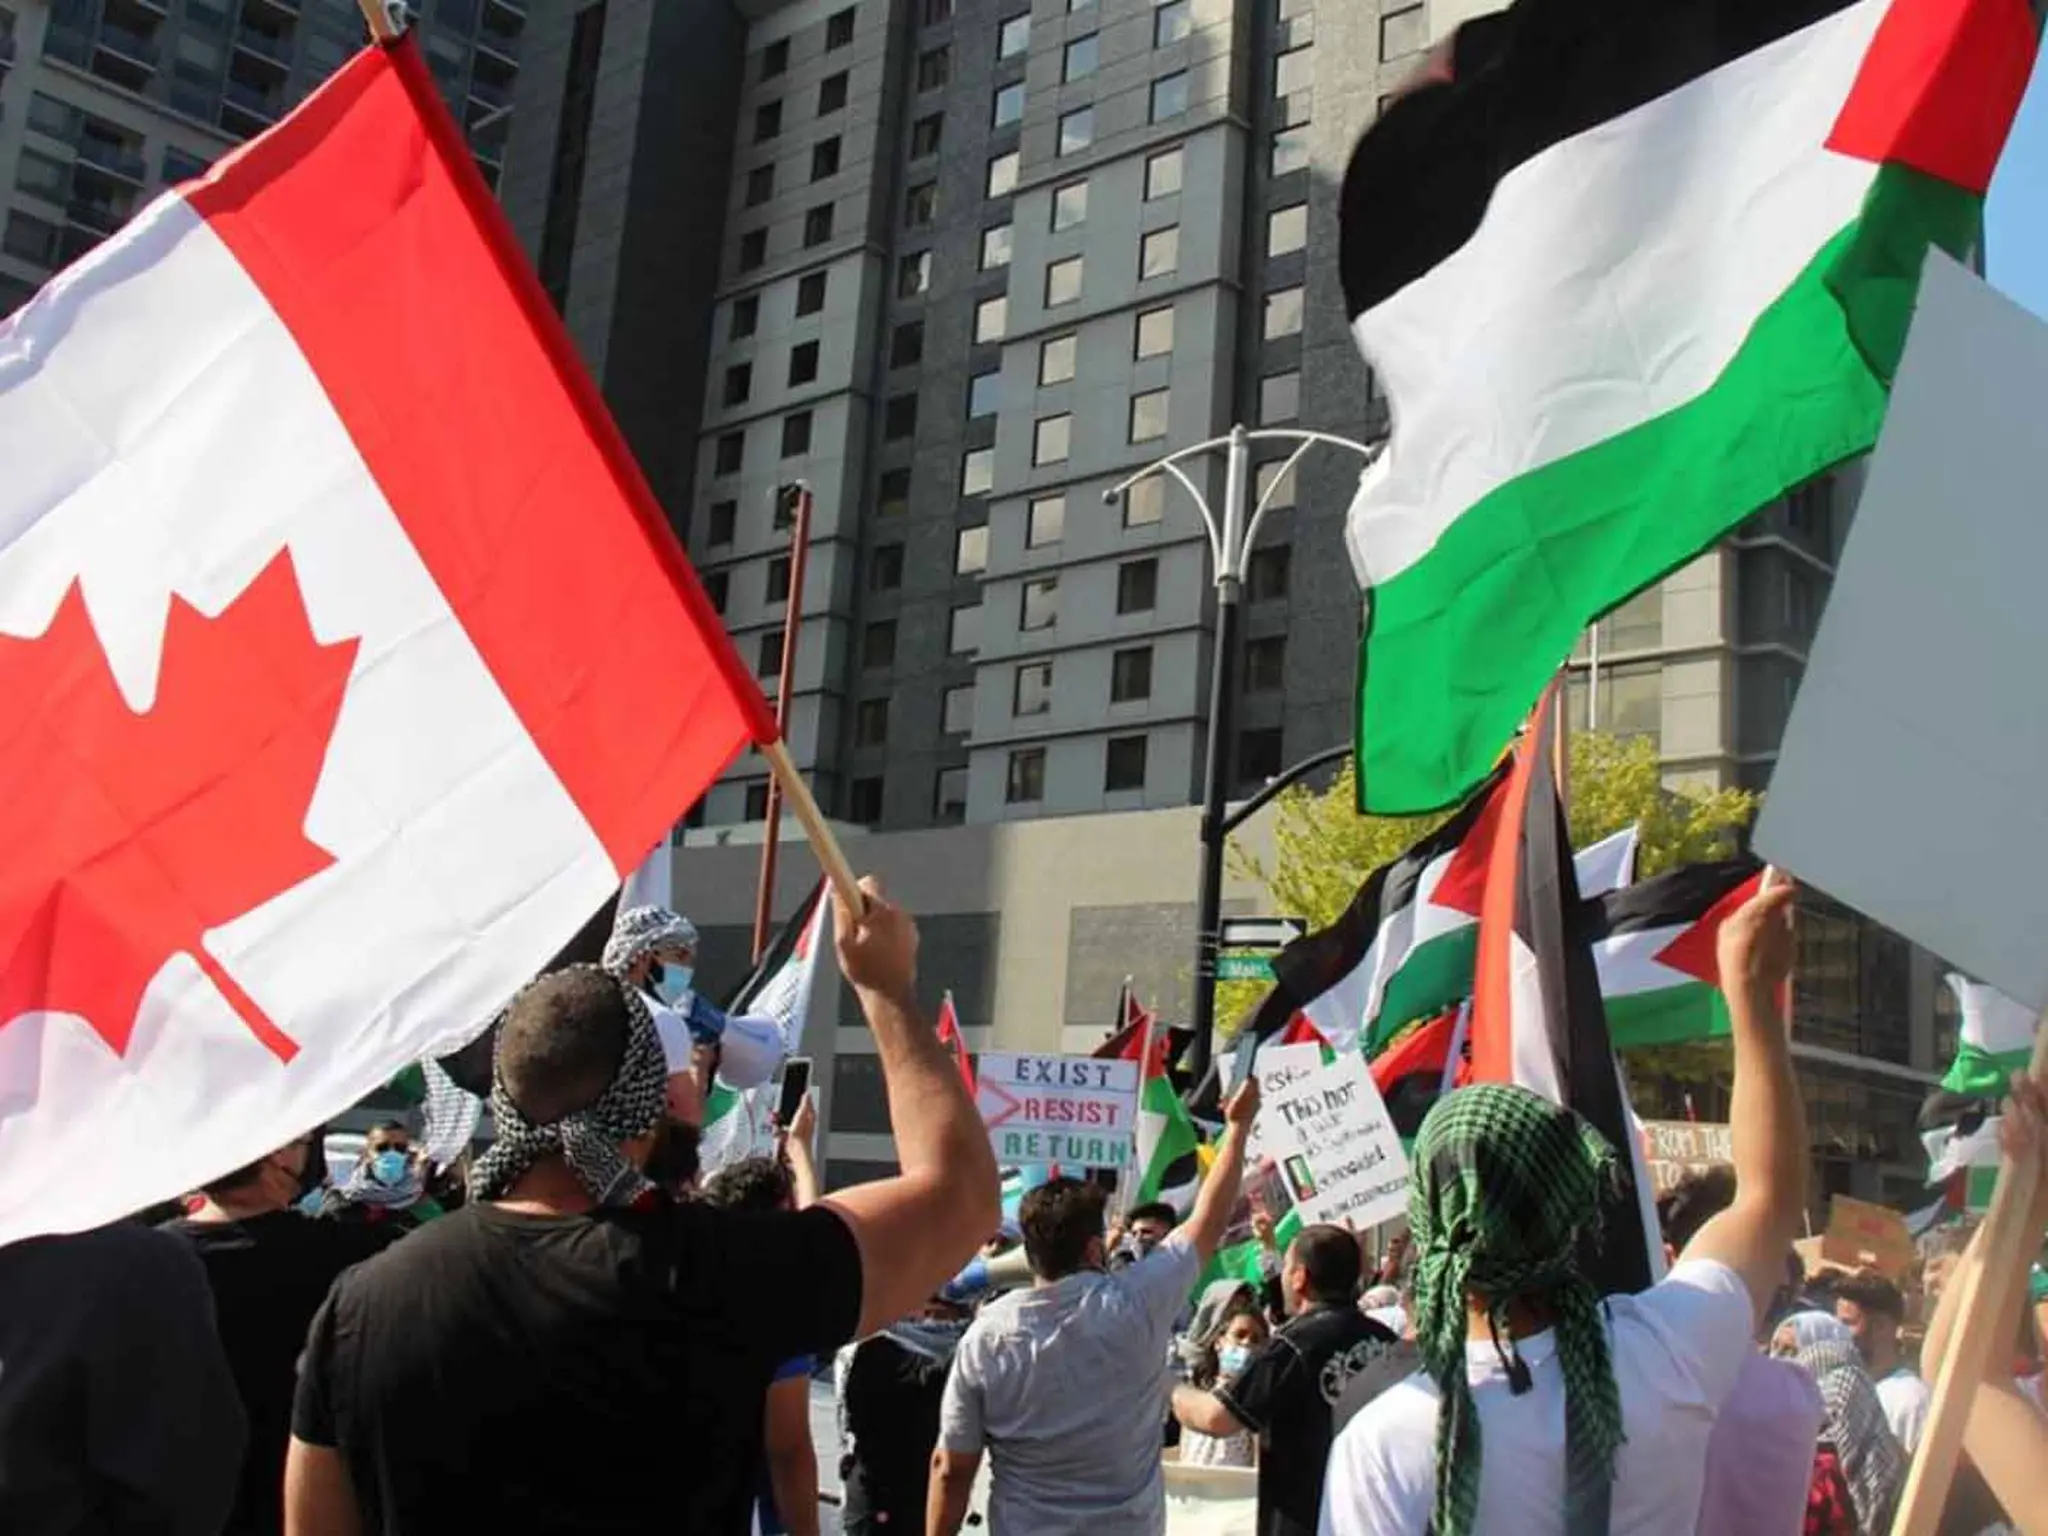 Accepting refuge for thousands of Palestinians in Canada for 3 years